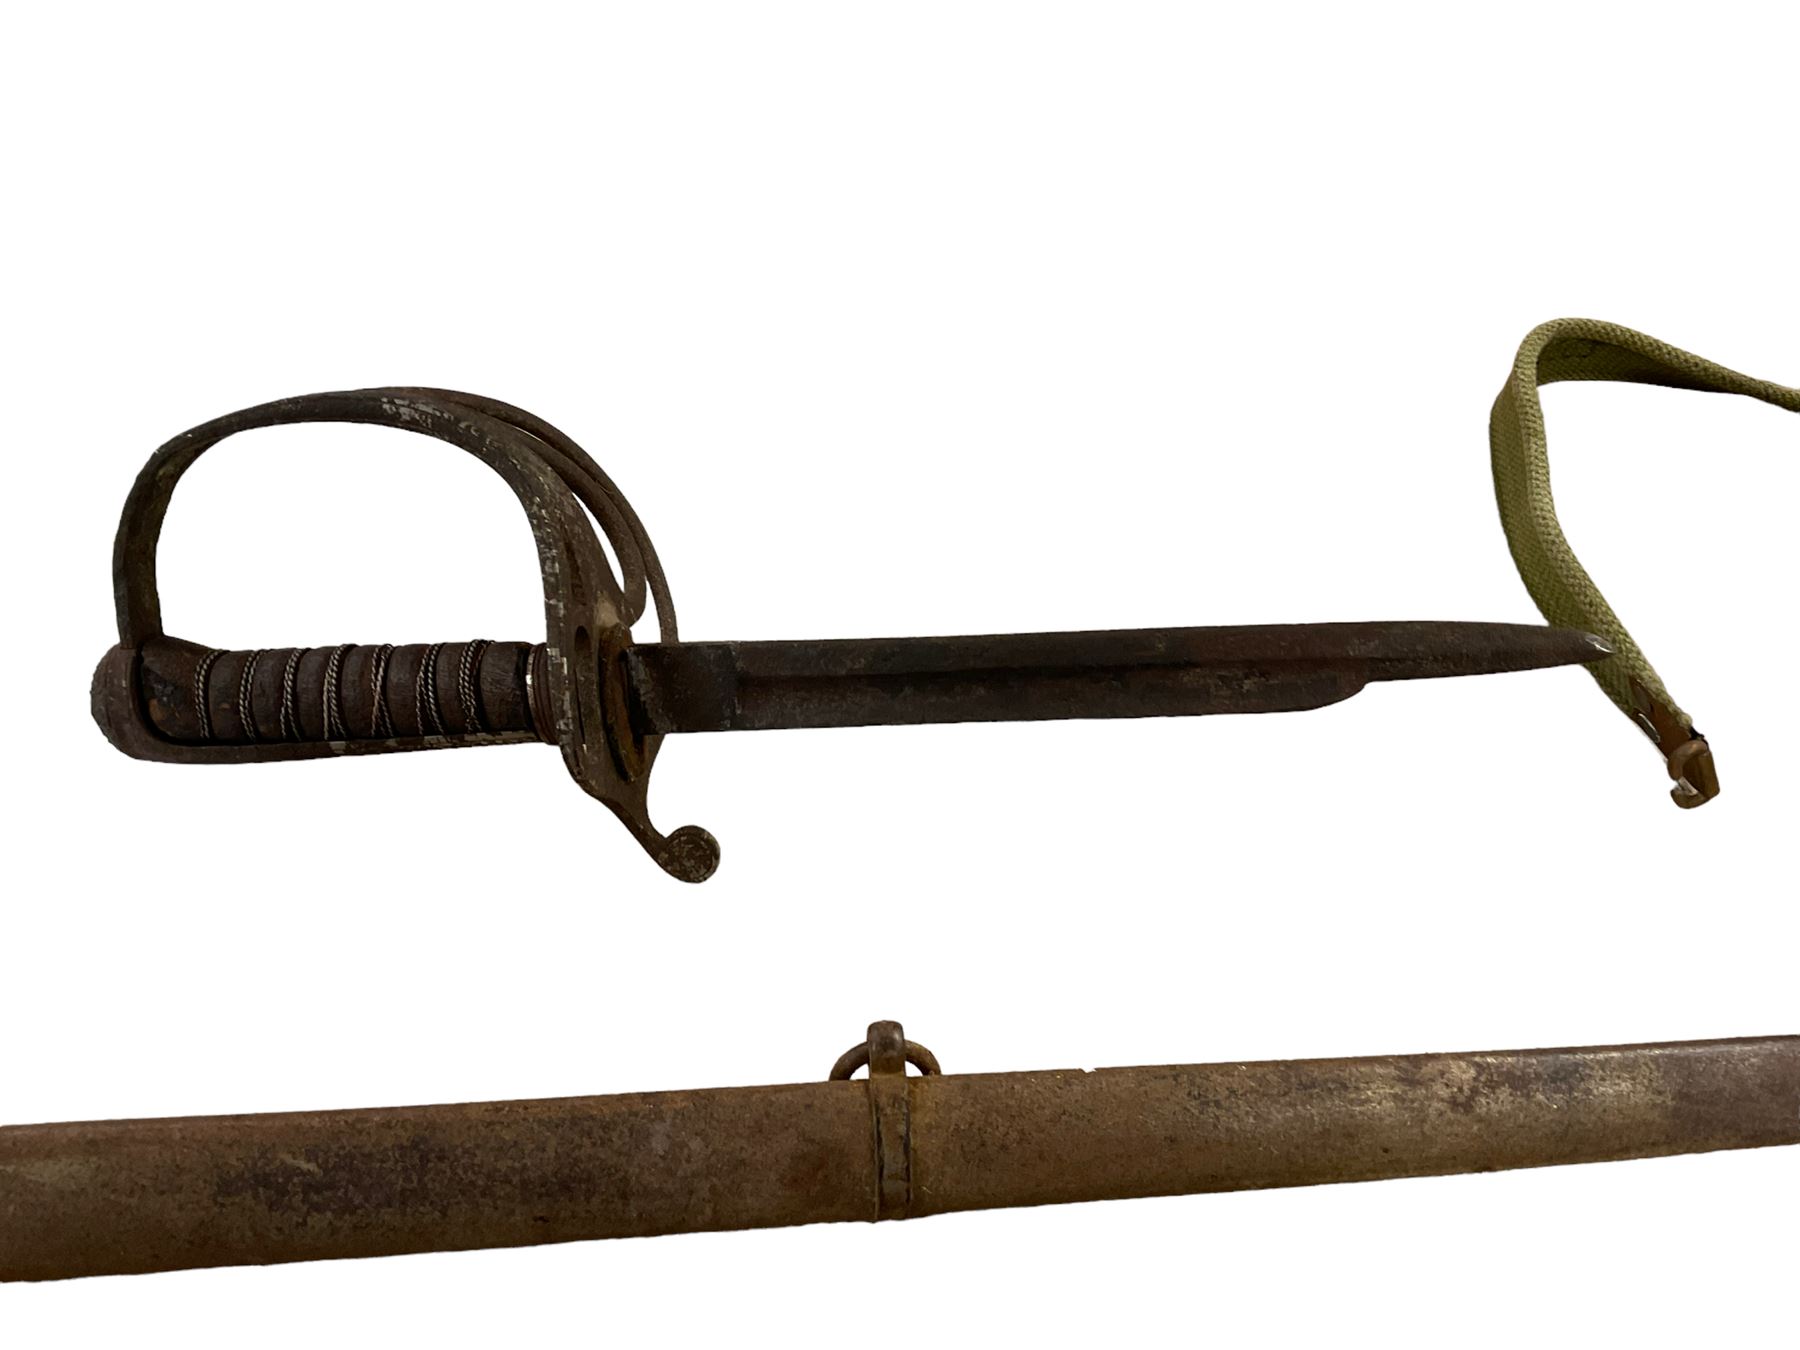 Converted sword with original metal scabbard - Image 2 of 3